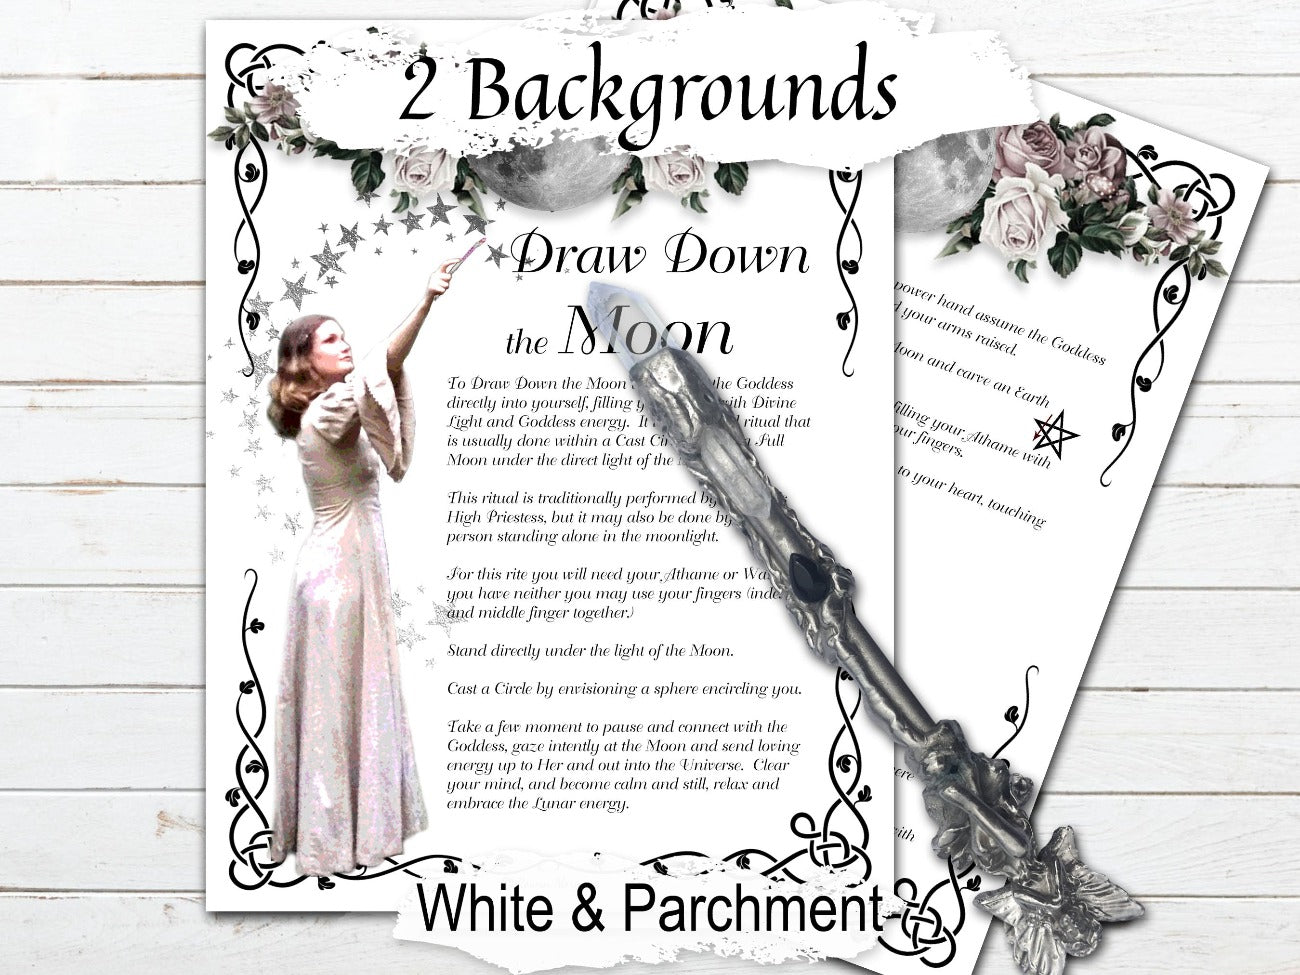 DRAW DOWN the MOON a Wicca Ritual, 2 Pages, Witchcraft Full Moon Magic, Moon Goddess, Moon Spell, Wicca Moon Esbat Prayer Meditation Ritual - Morgana Magick Spell